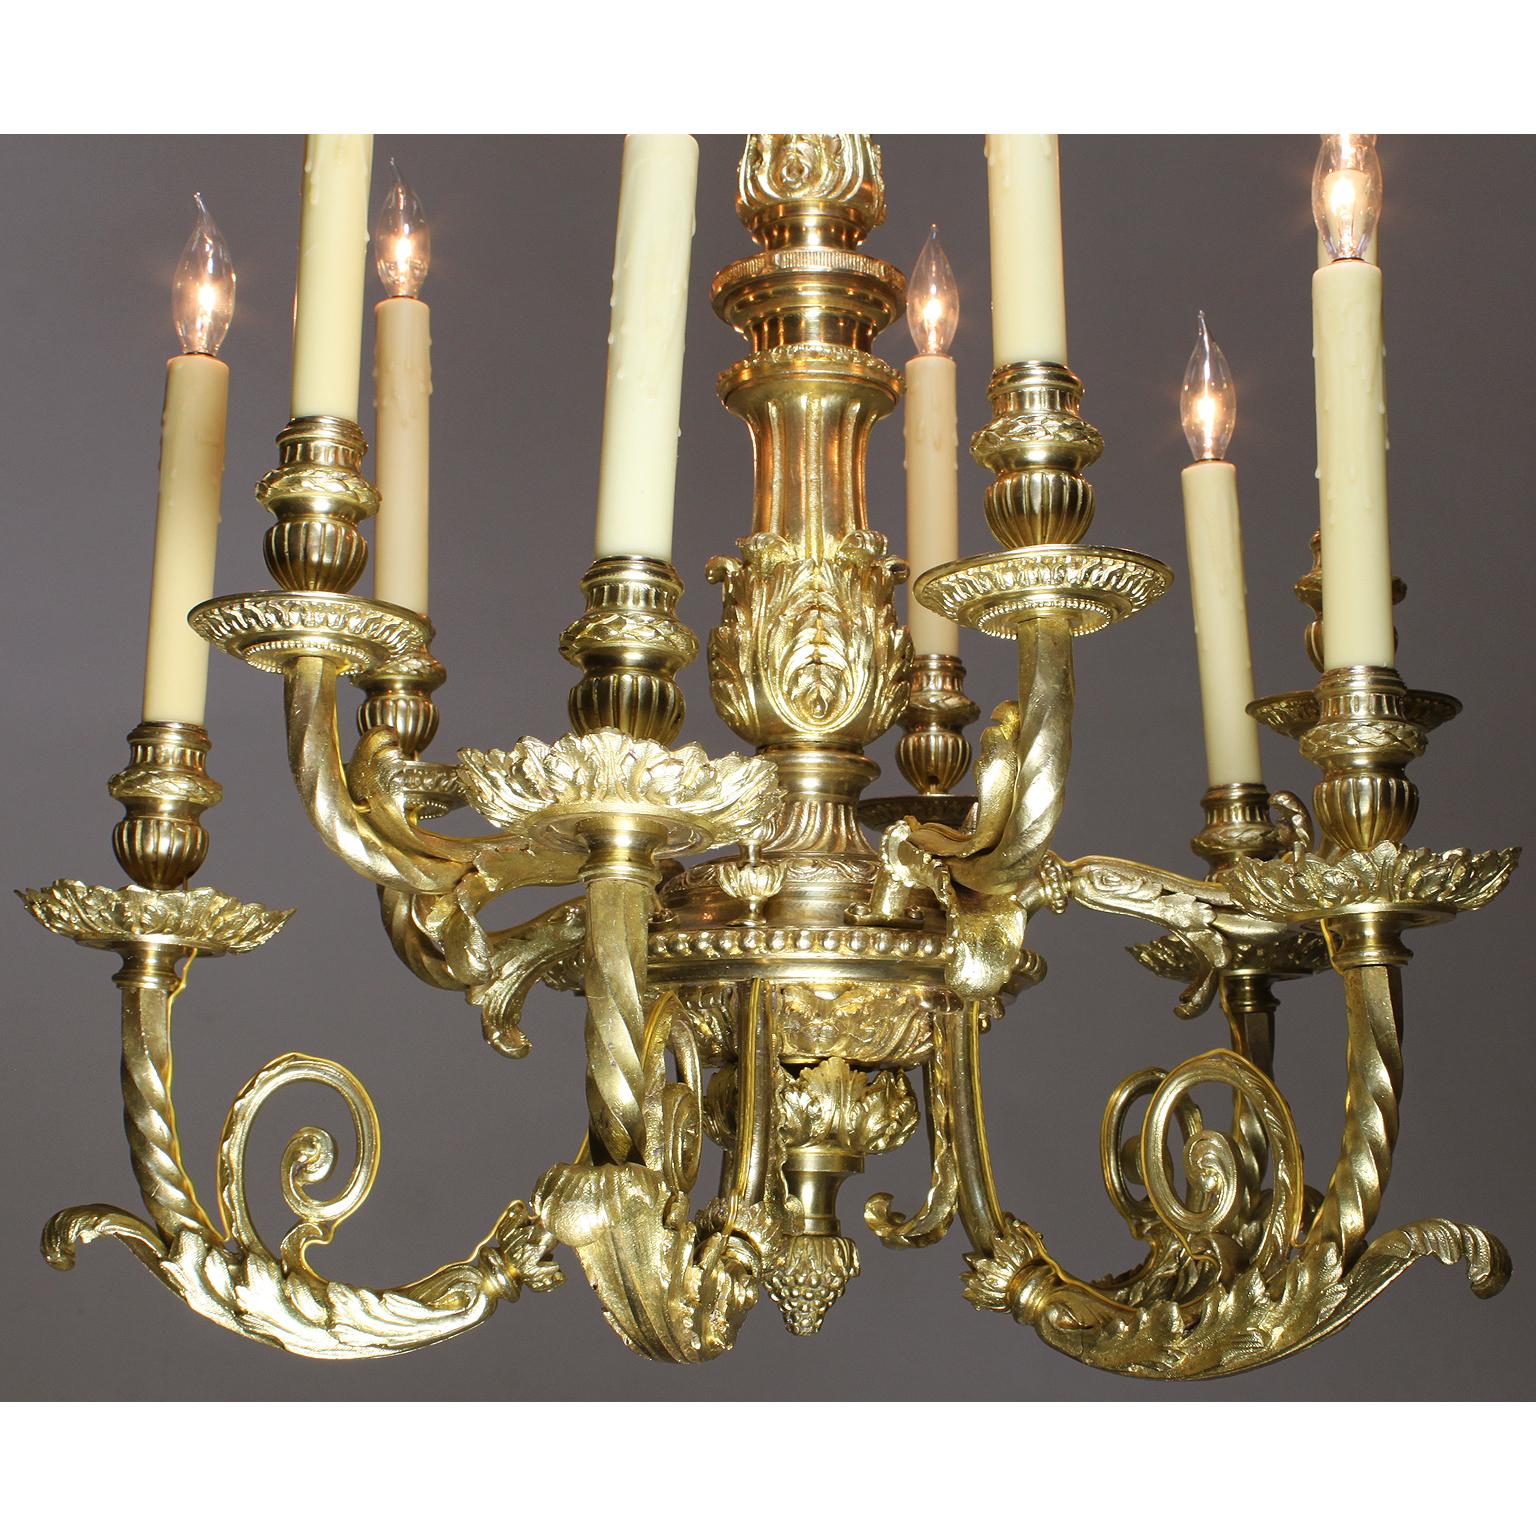 Early 20th Century Fine French 19th-20th Century Louis XV Style Gilt-Bronze Ten-Light Chandelier For Sale